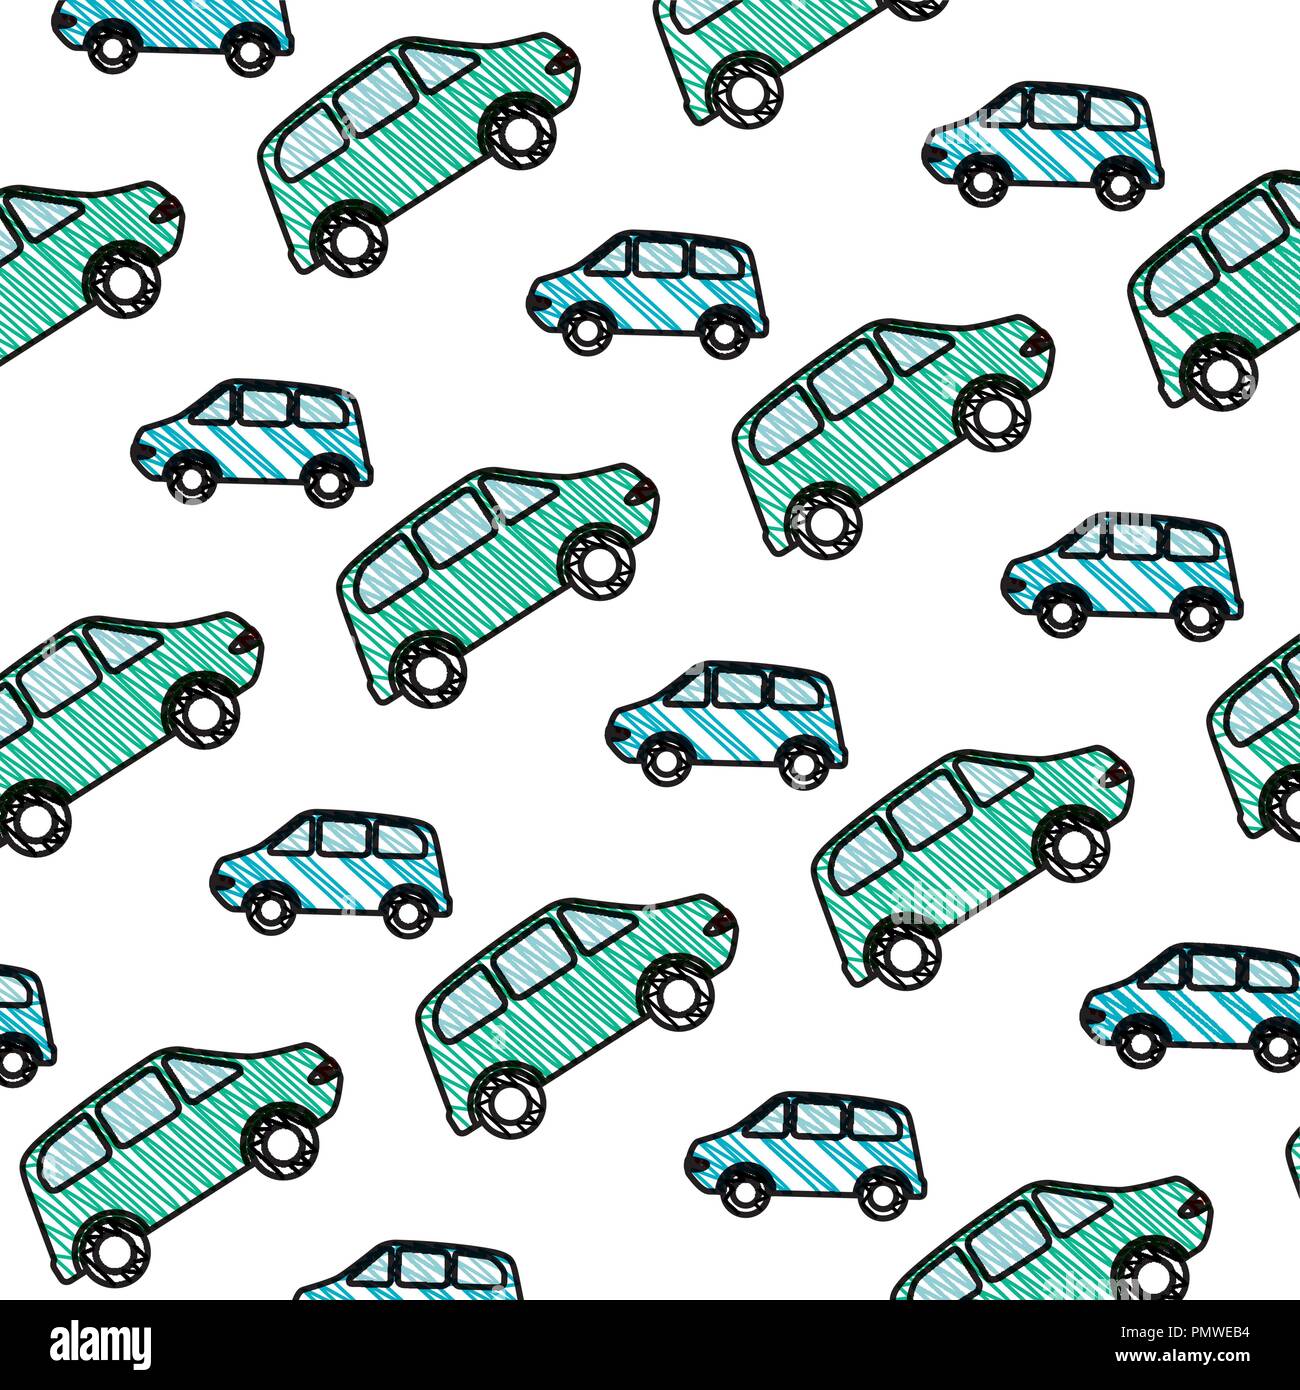 cars vehicles pattern background Stock Vector